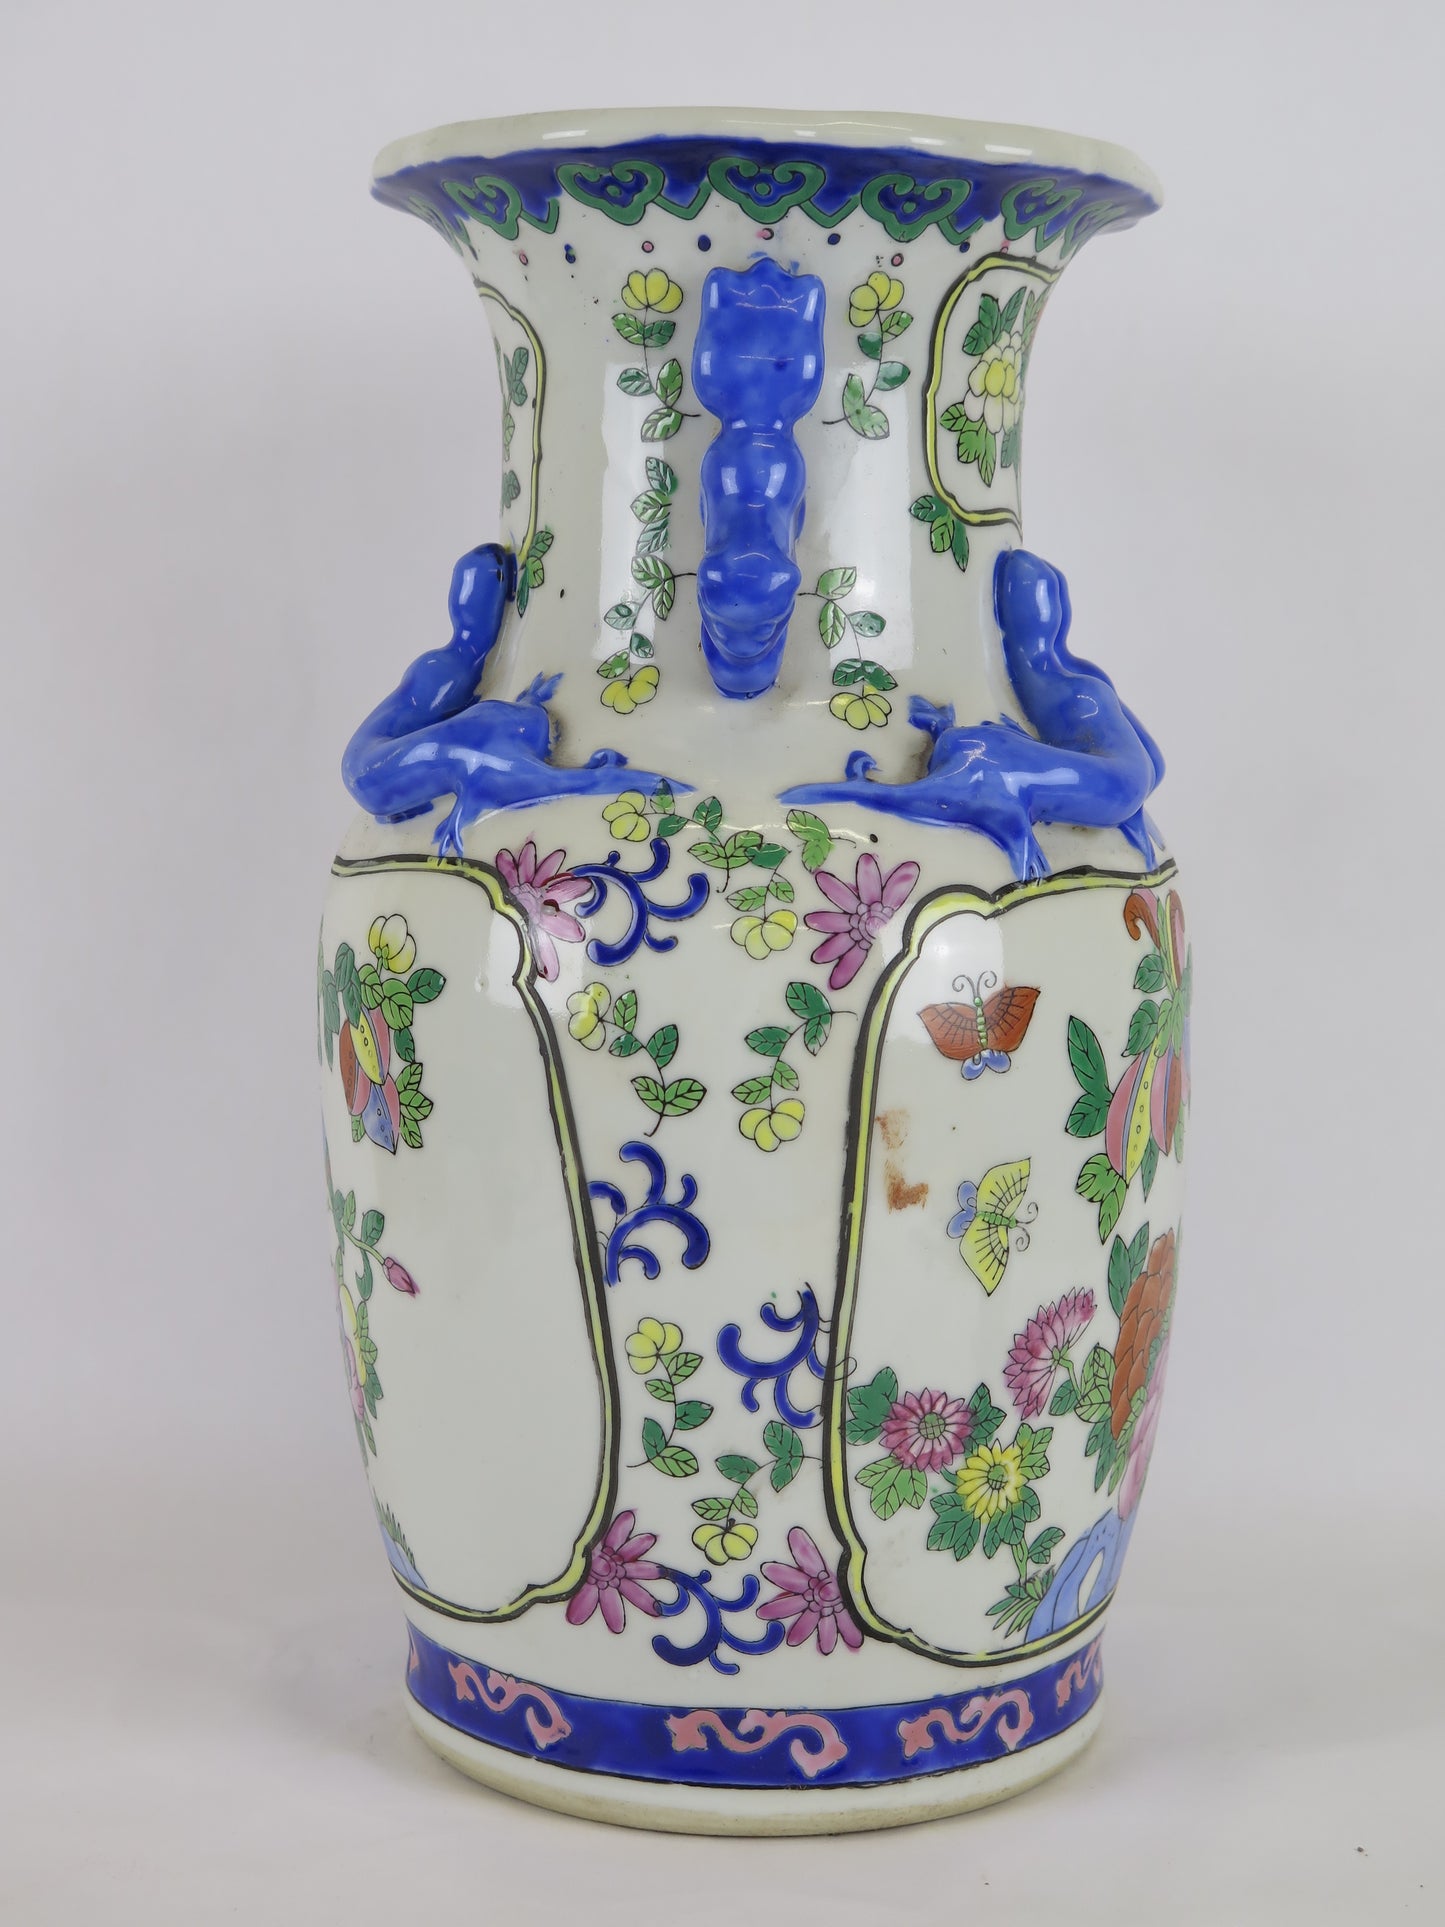 Vintage hand-painted glazed ceramic vase with floral and vegetal motifs China Asia '900 CM5